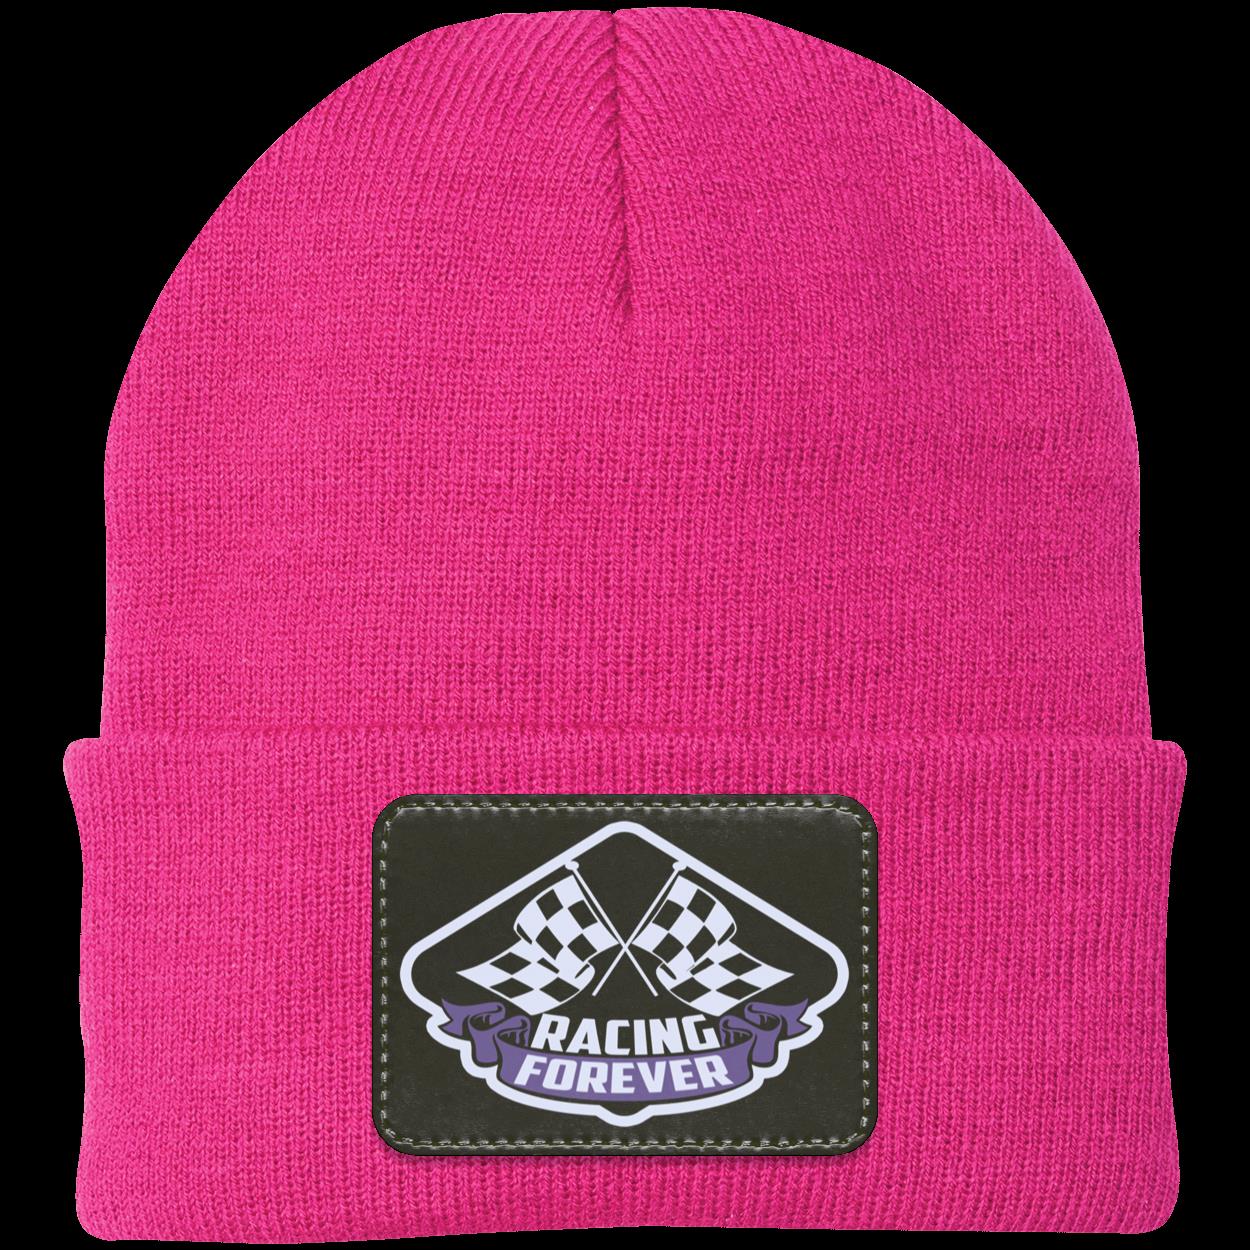 Racing Forever Patched Knit Cap V5